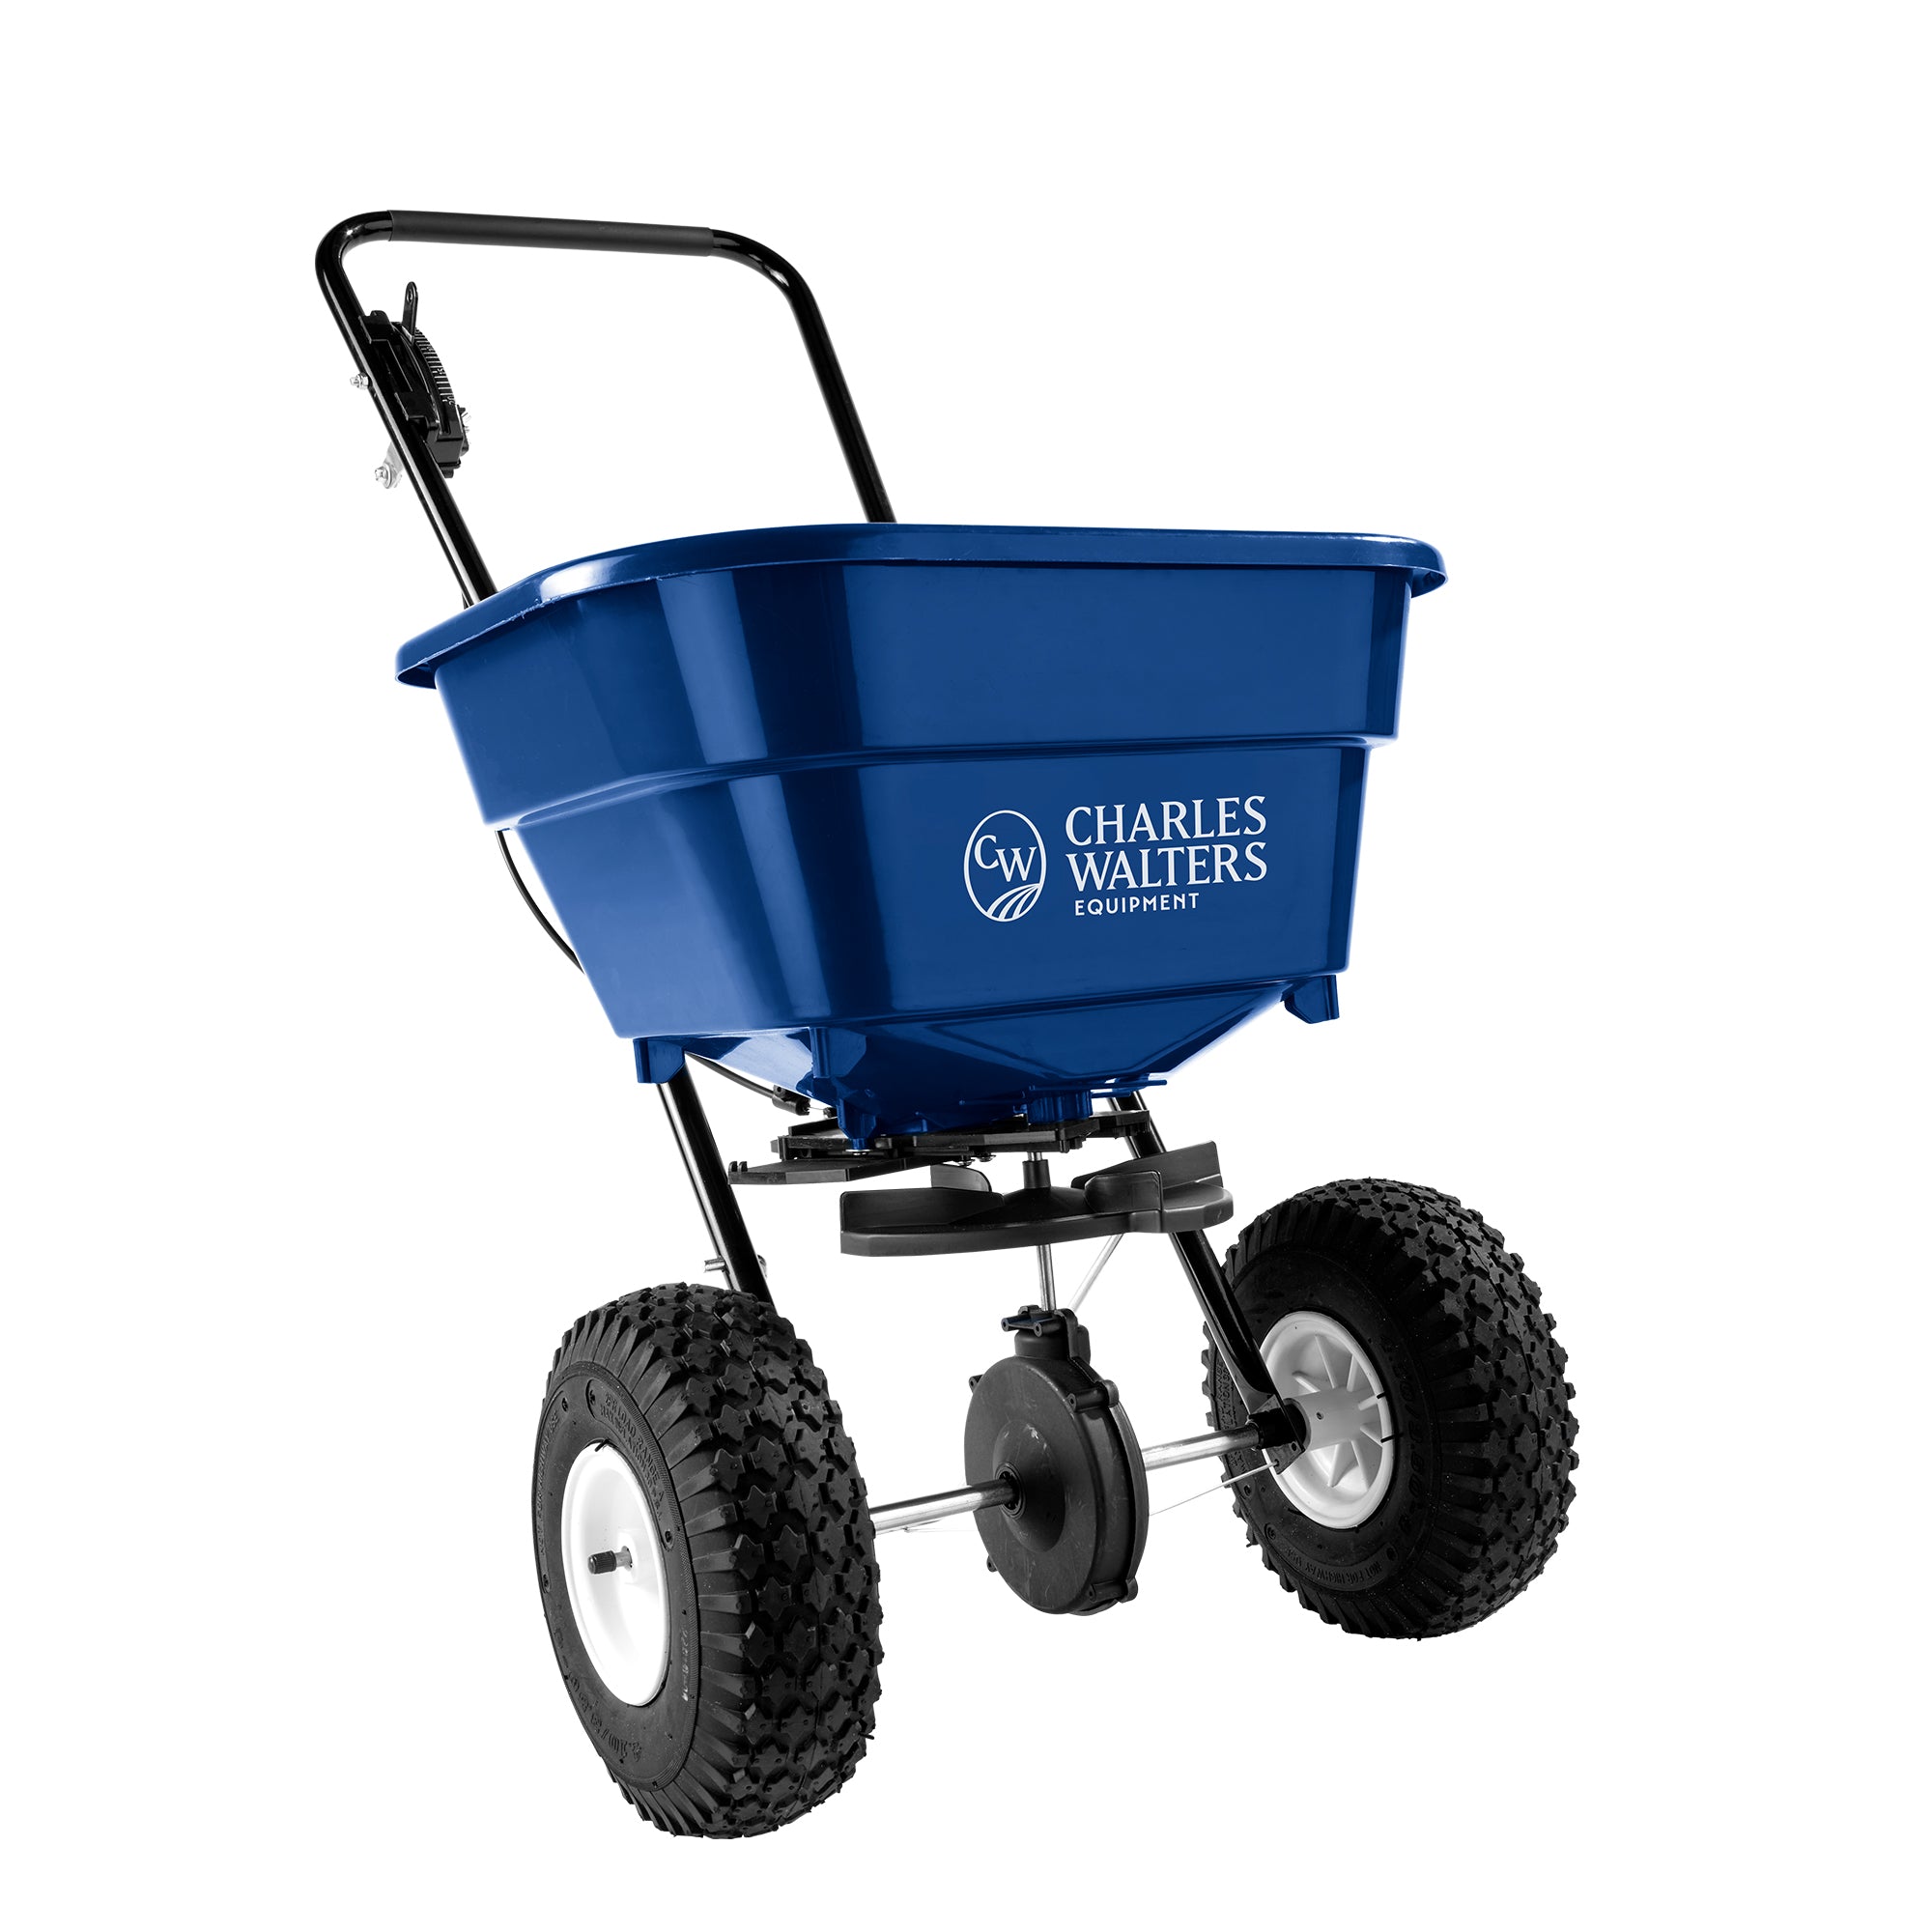 Charles Walters Equipment Estate Style Broadcast Spreaders for Spreading Fertilizer and Ice Melt on Lawns, Sidewalks, and Driveways, 65lb Capacity